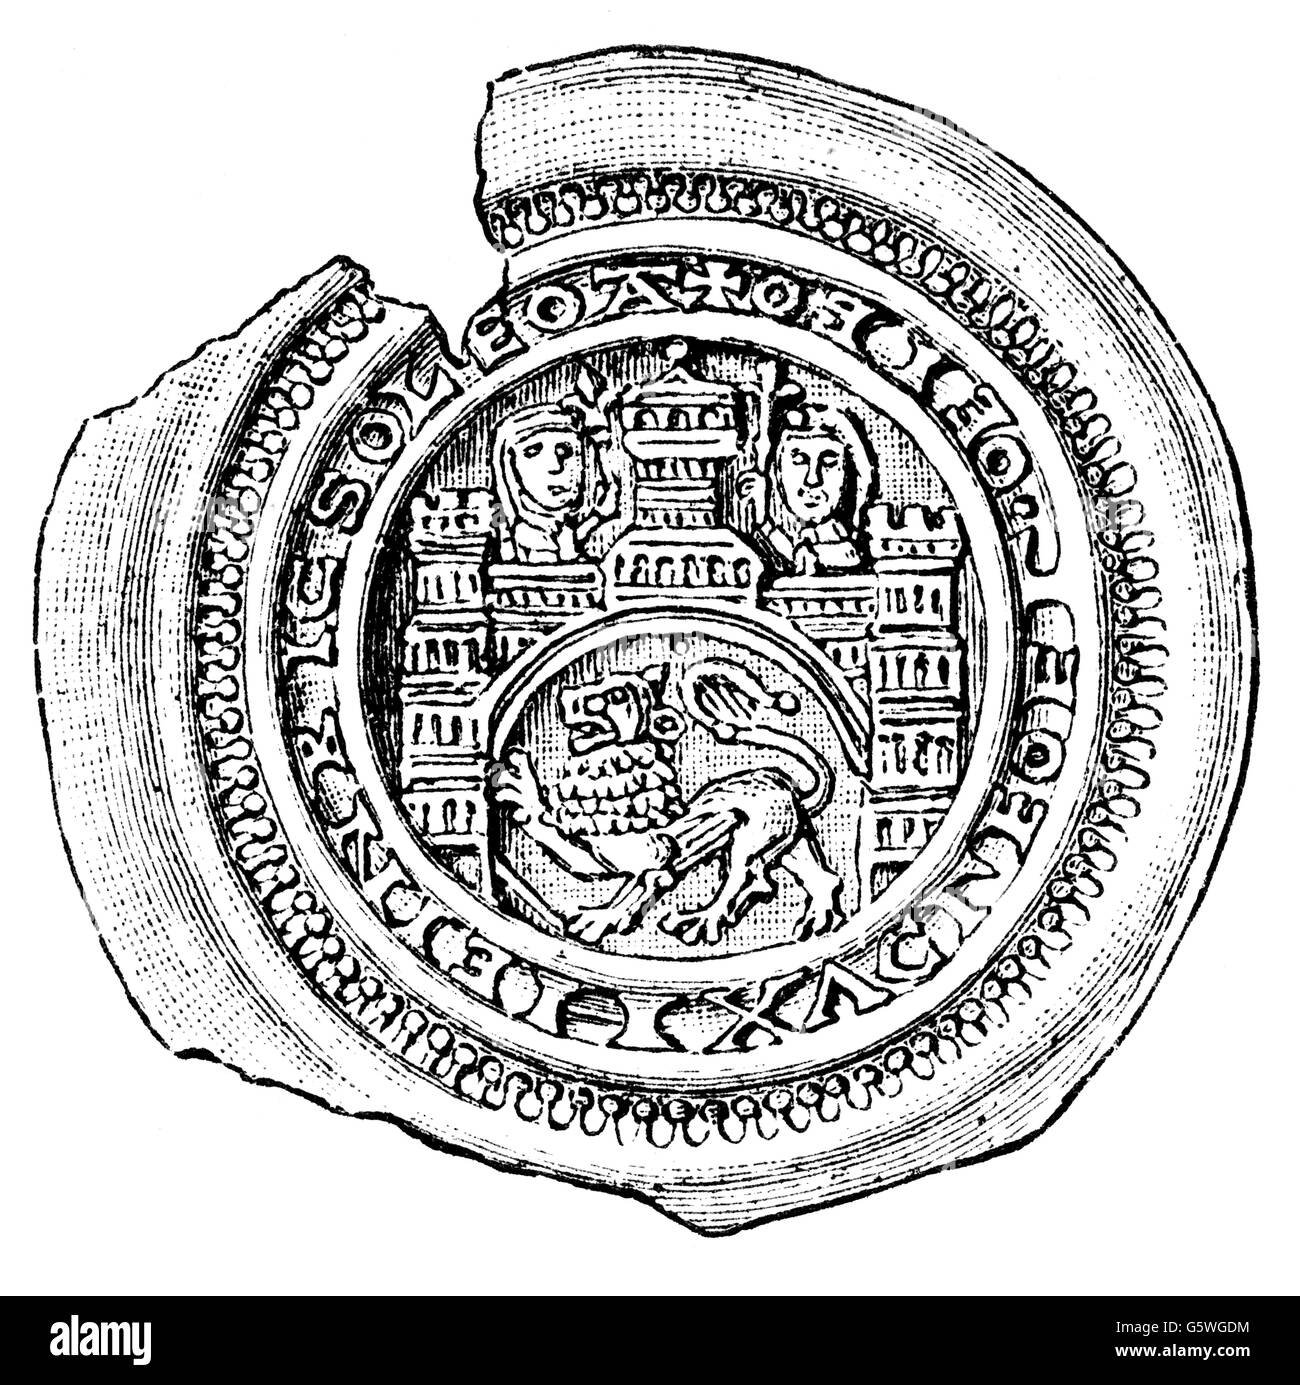 money / finances, coins, Germany, bracteate, by duke Henry the Lion, silver, 12th century, wood engraving, by C.L. Becker, 19th century, 12th century, Middle Ages, medieval, mediaeval, numismatics, Holy Roman Empire, Guelf, House of Welf, Guelph, Welf dynasty, Henry the Lion, lion, lions, coins, coin, duke, dukes, gate, gates, city, historic, historical, people, Additional-Rights-Clearences-Not Available Stock Photo